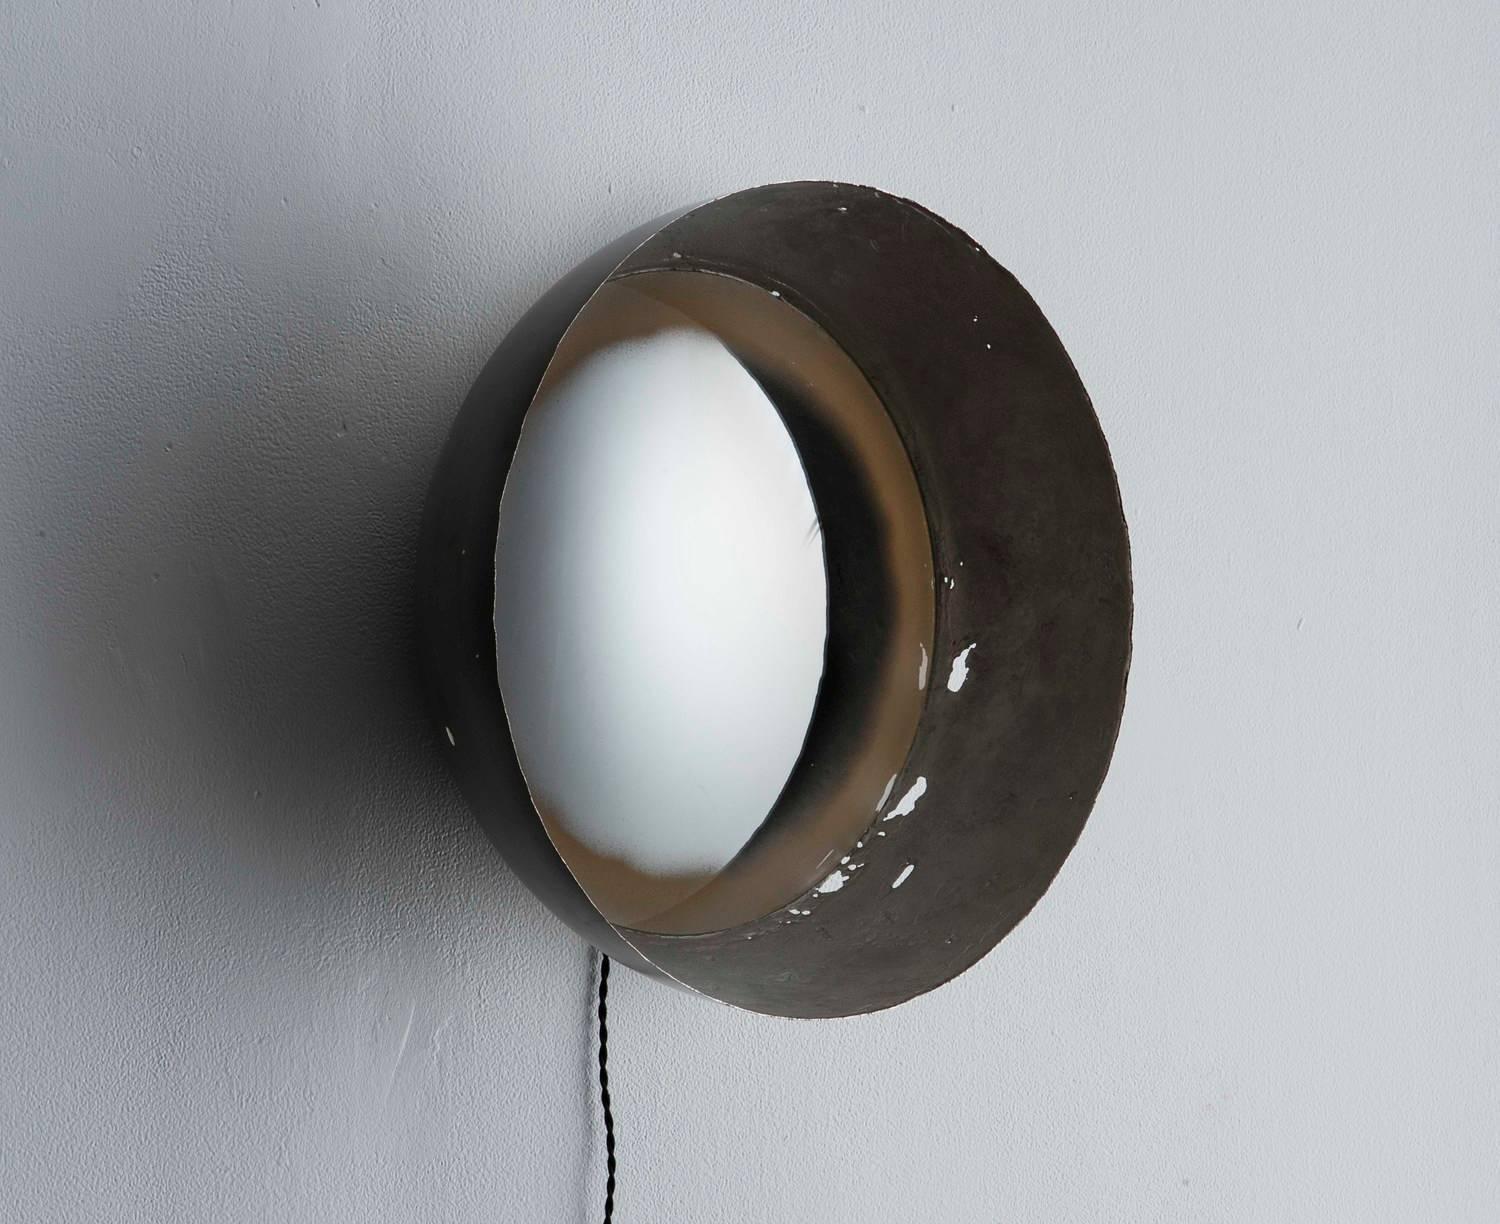 This curved light fixture creates a stunning lighting effect using various curved surfaces. The body of the light is a formed metal hemisphere with an inset convex mirror. The edge of the mirror is backlit through an area with a hand applied